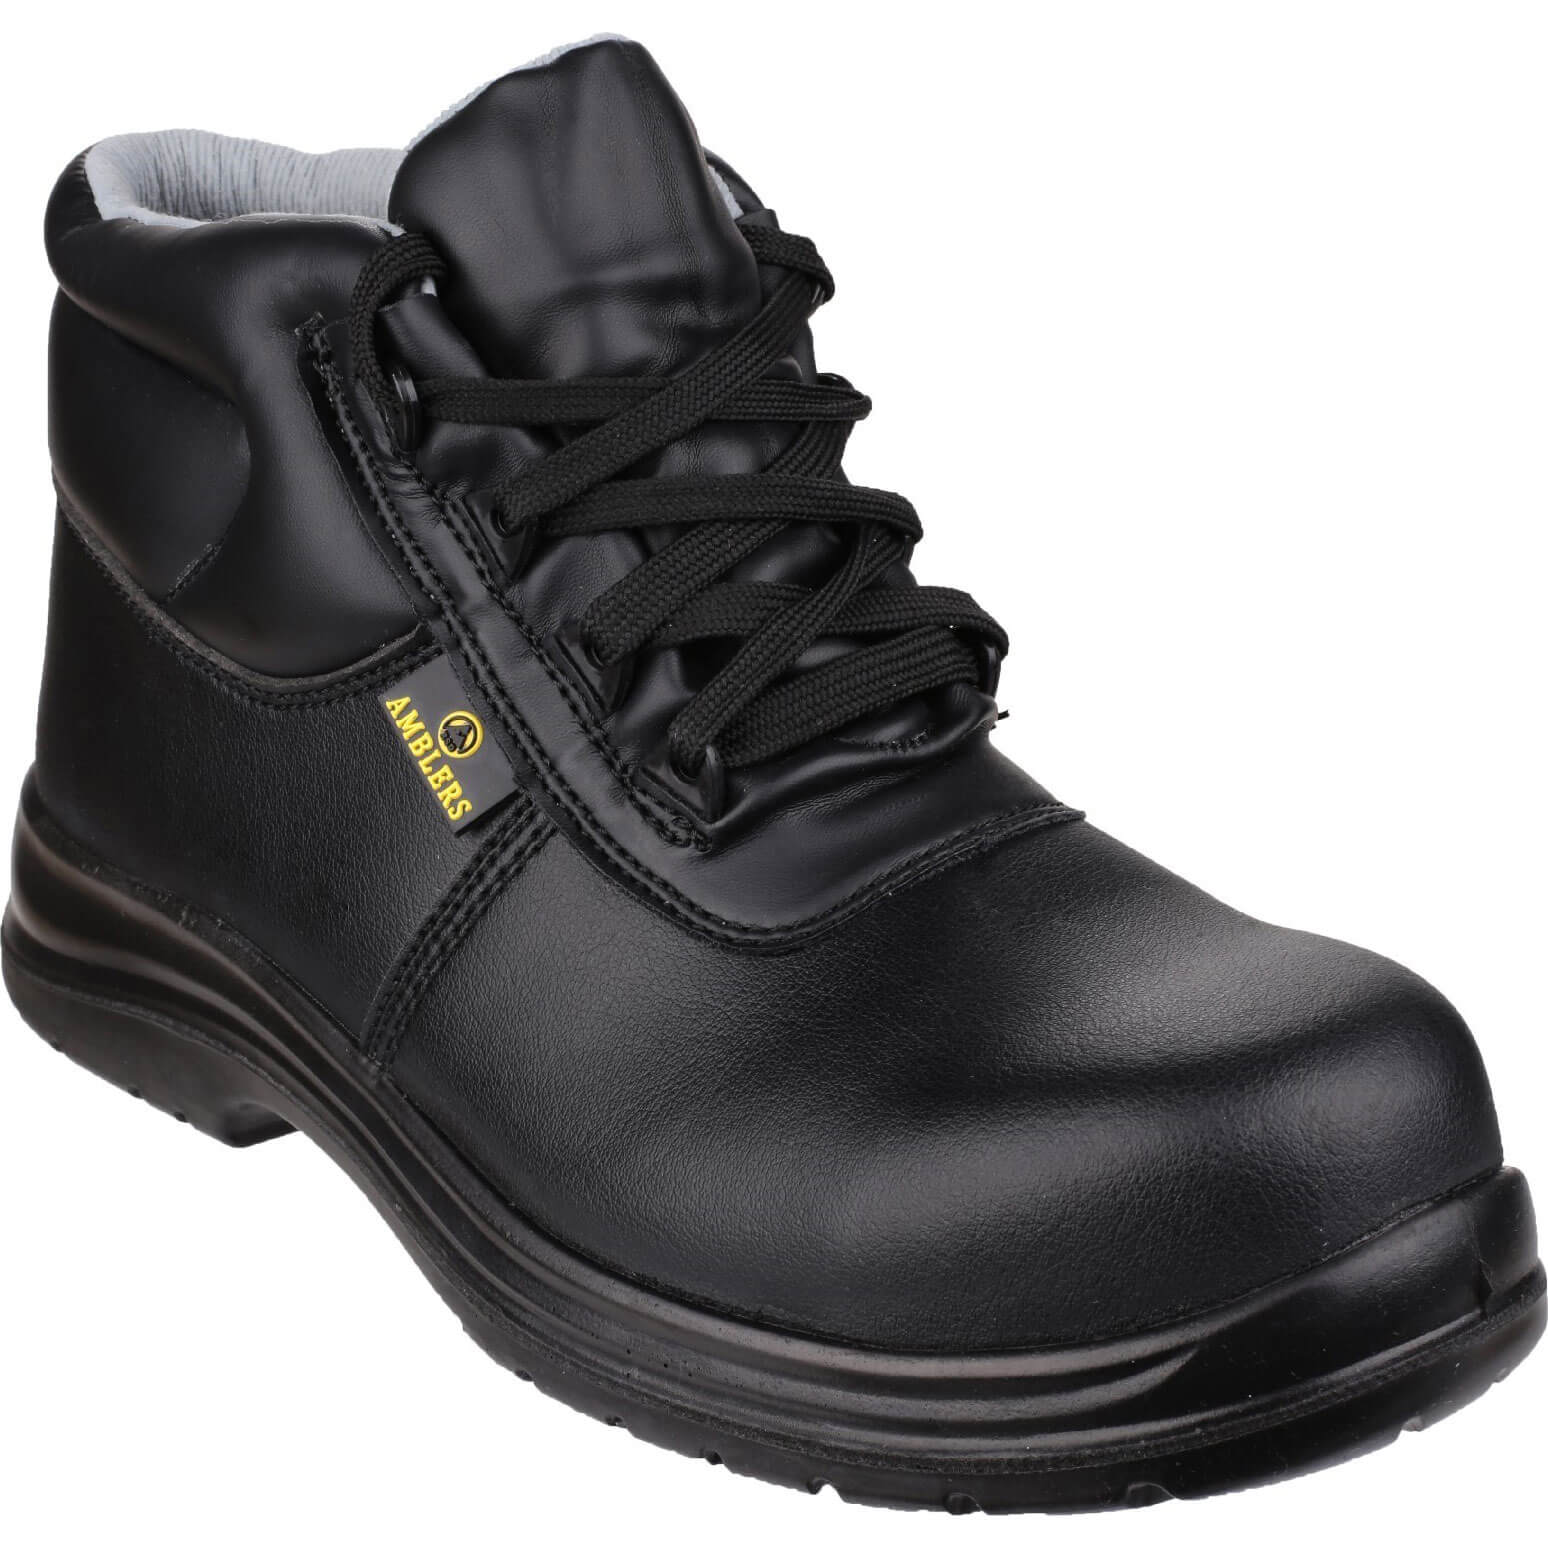 Photo of Amblers Mens Safety Fs663 Metal-free Water-resistant Safety Boots Black Size 5